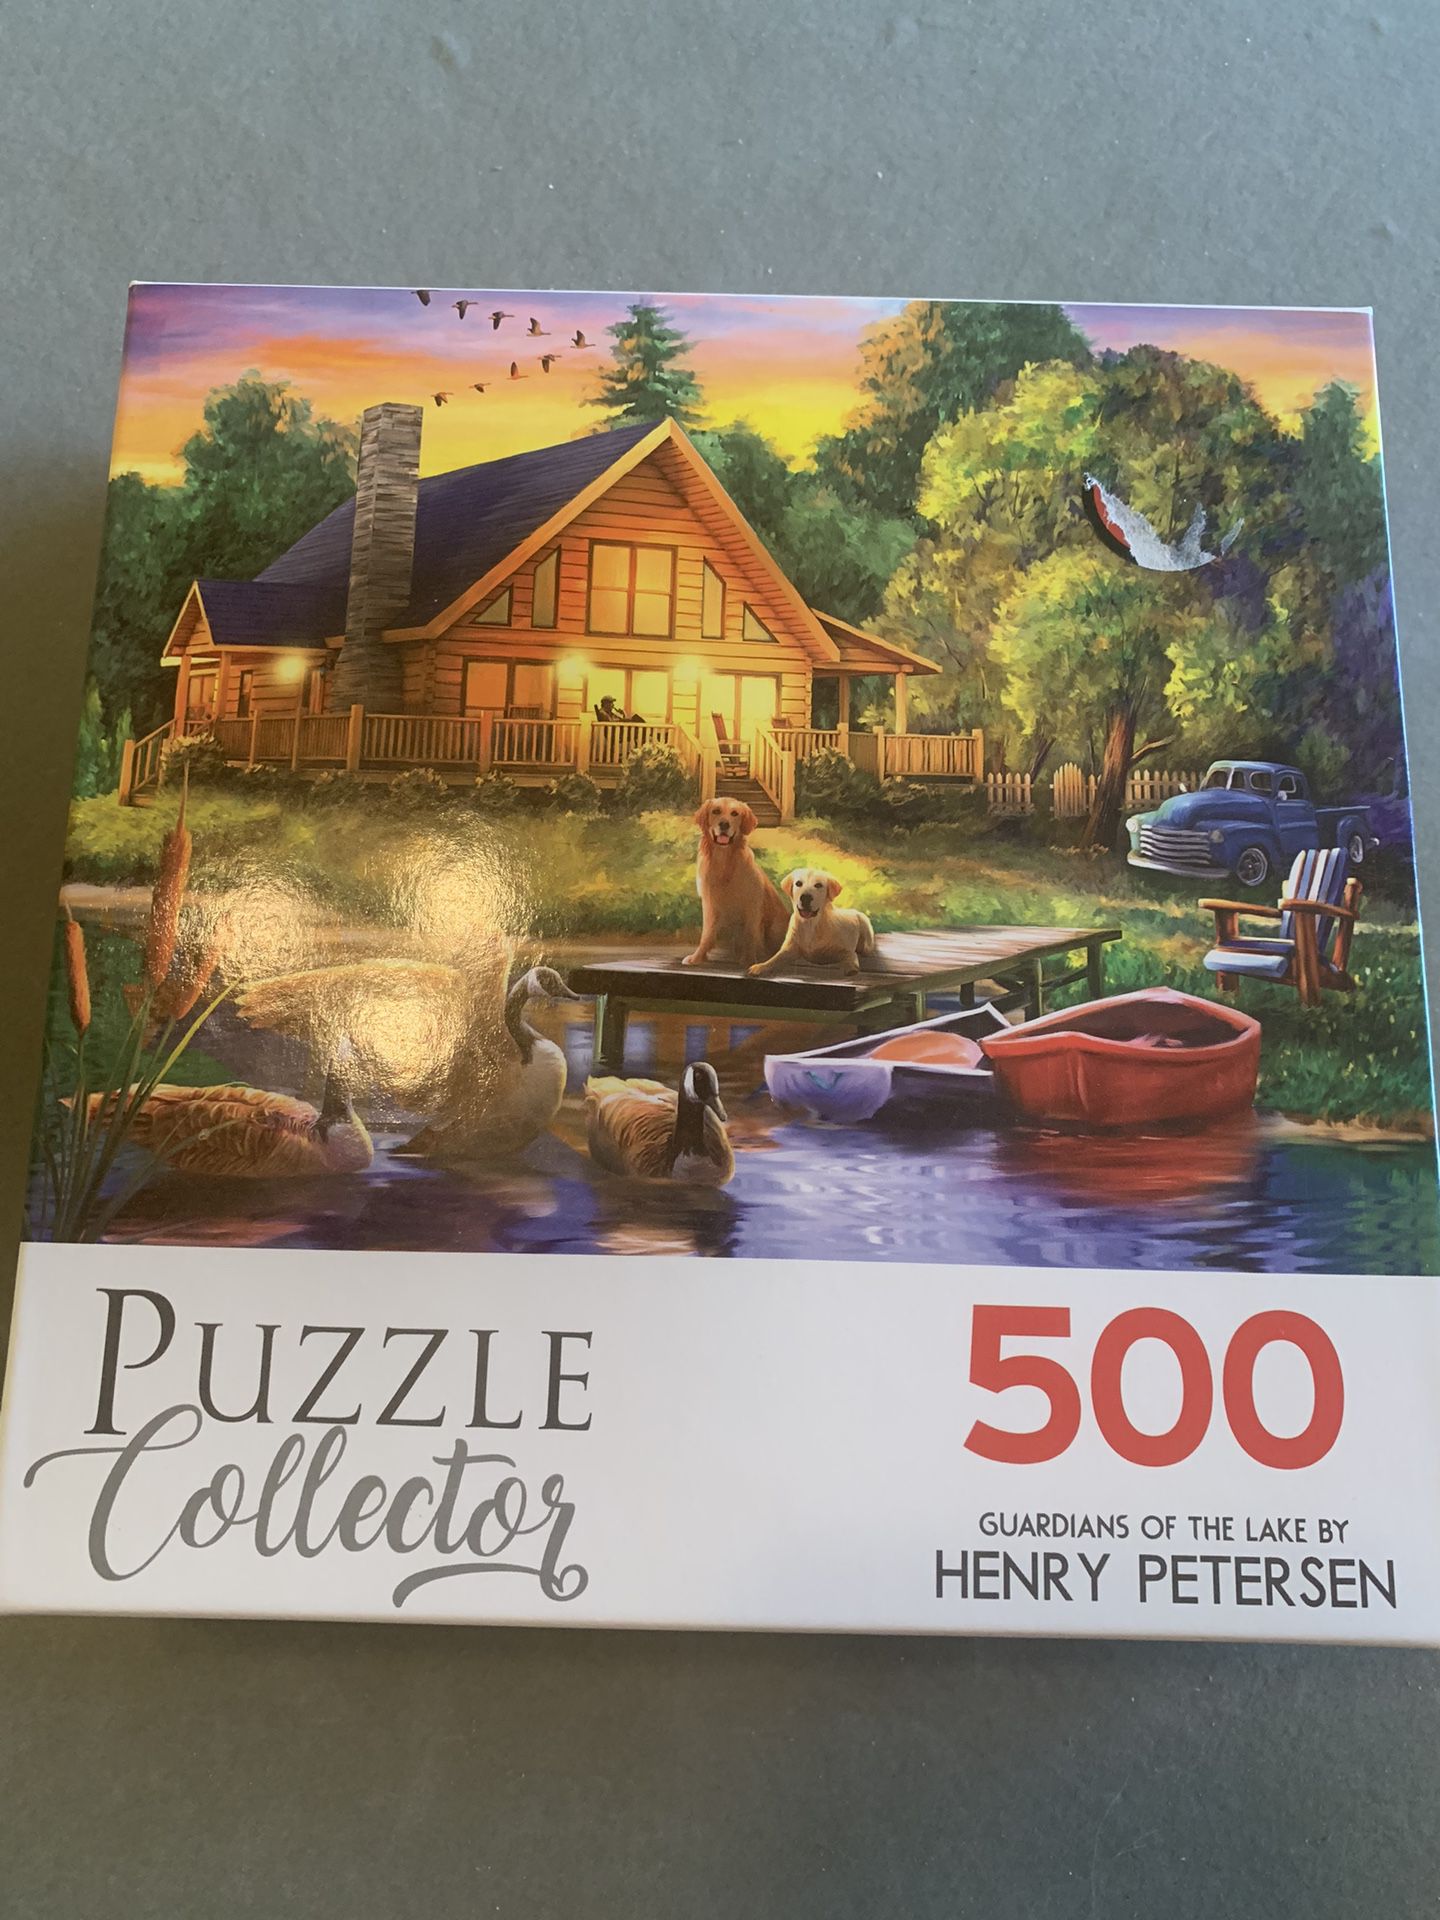 Jigsaw Puzzle - 500 Pieces 